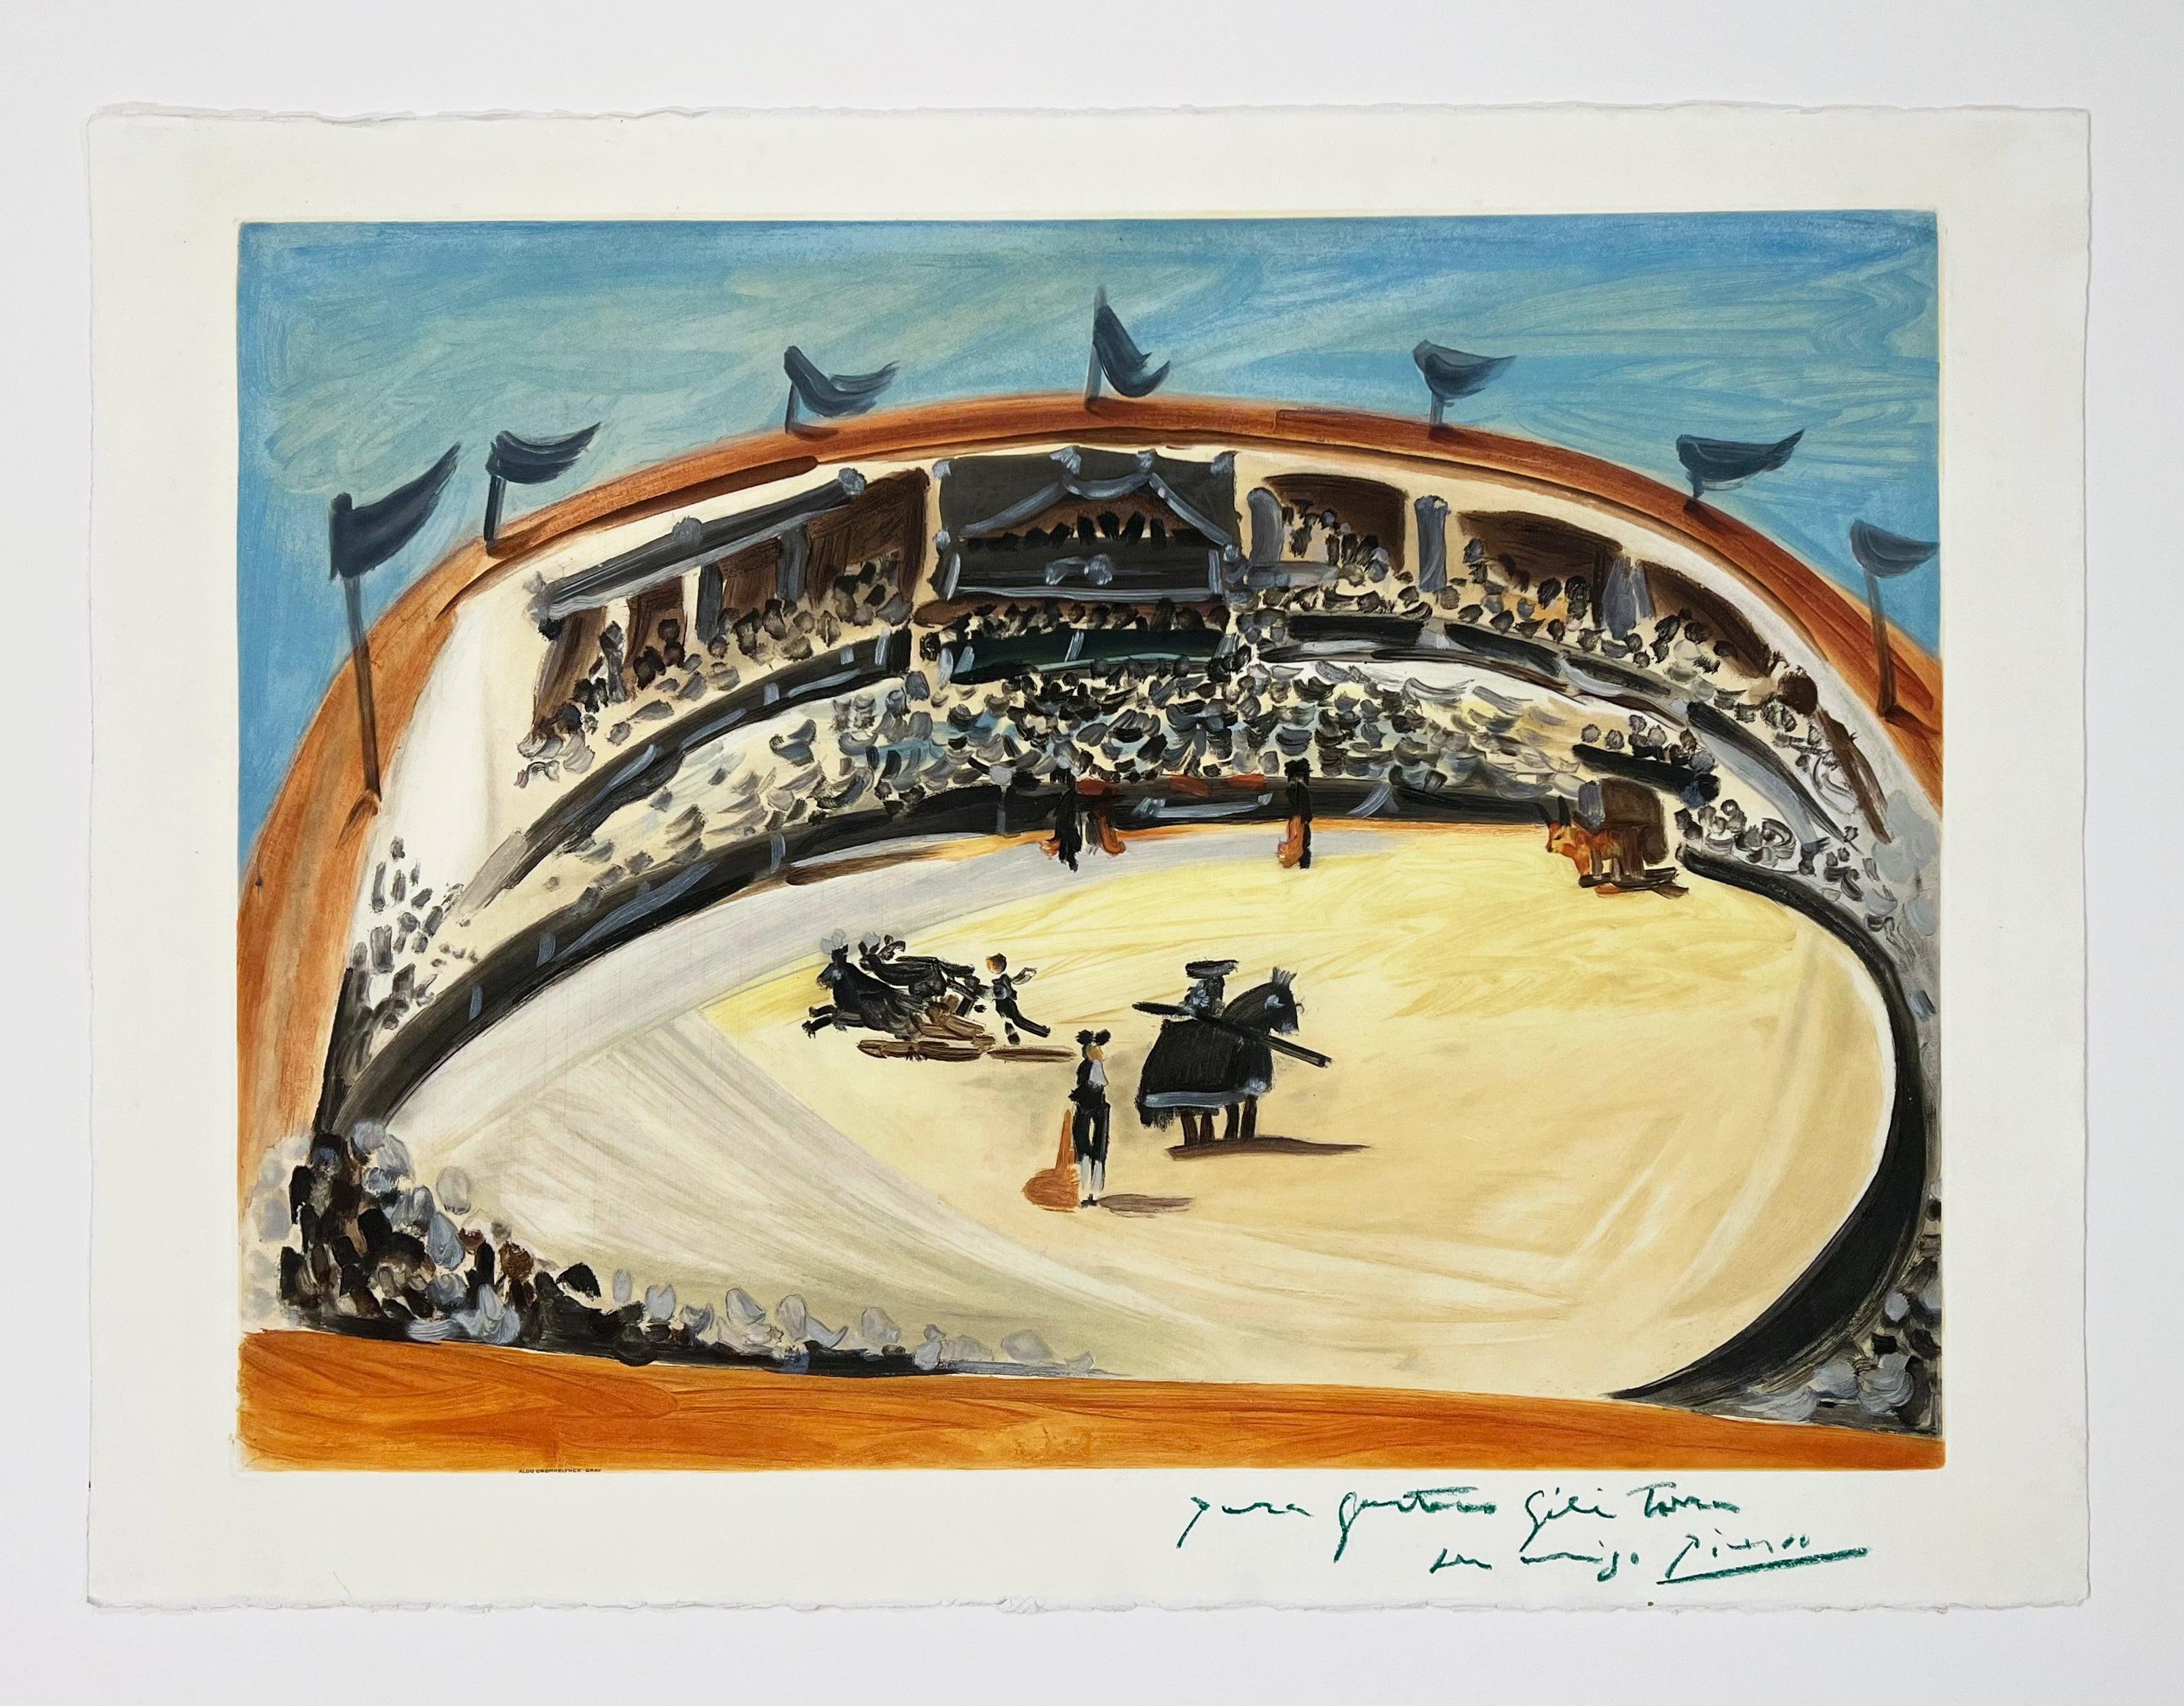 La Corrida (The Bullfight) - Print by (after) Pablo Picasso